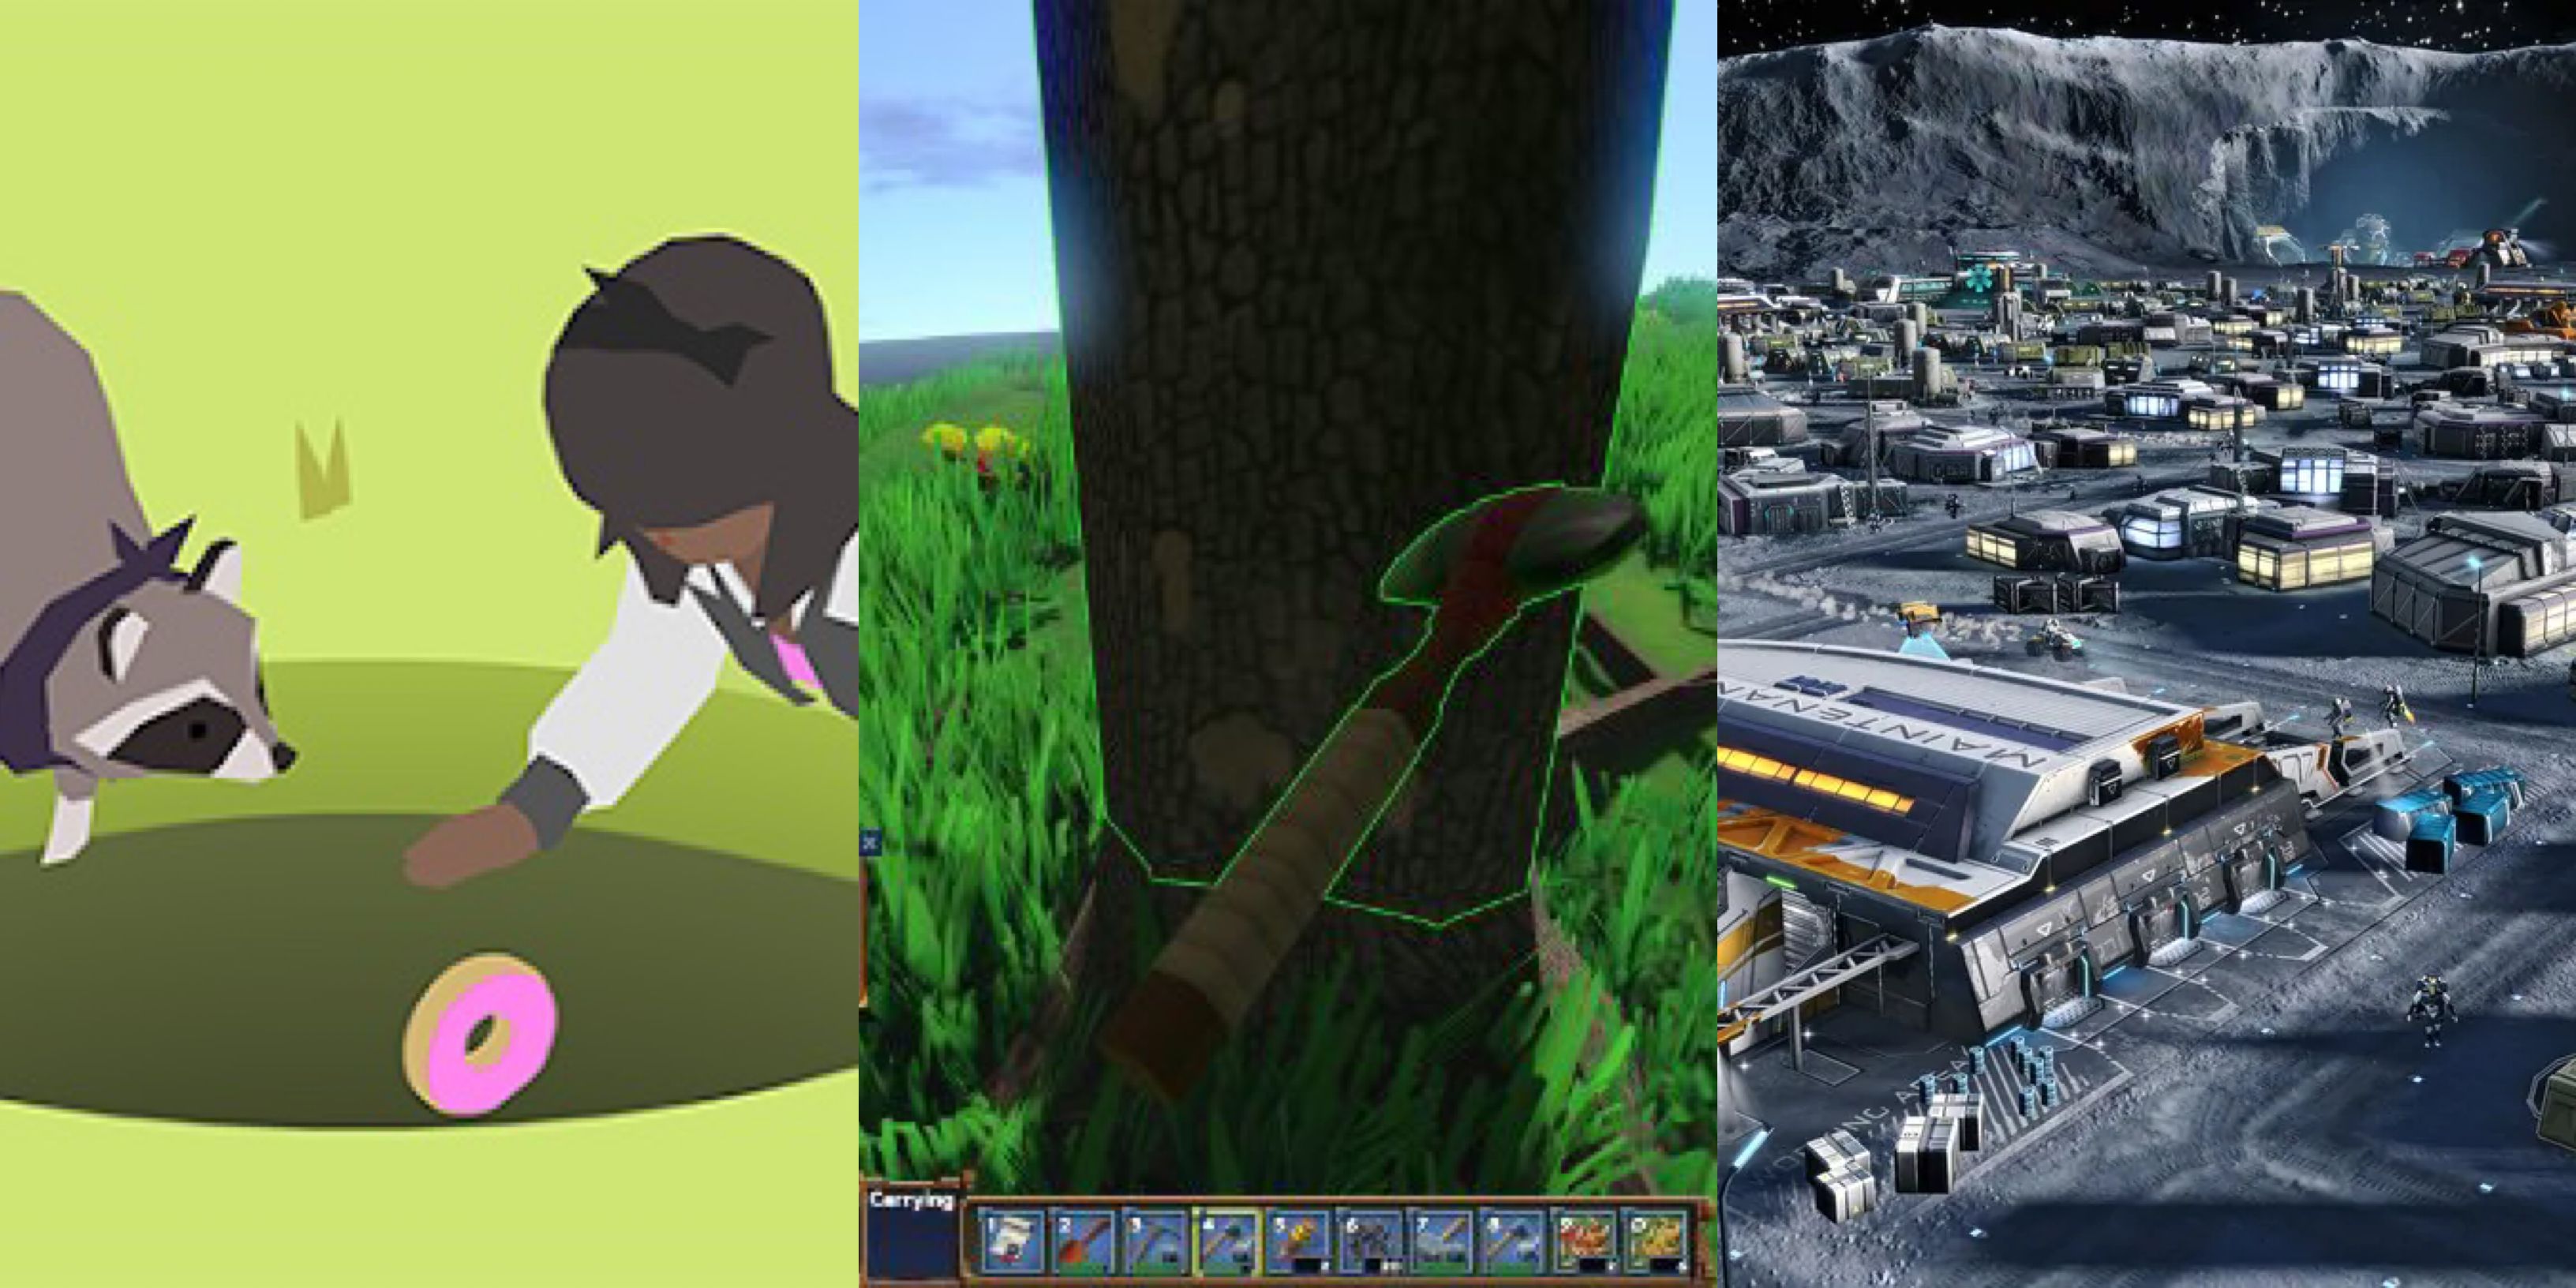 Games about saving the planet: Donut County (left), Eco (middle), and Anno 2205 (right)